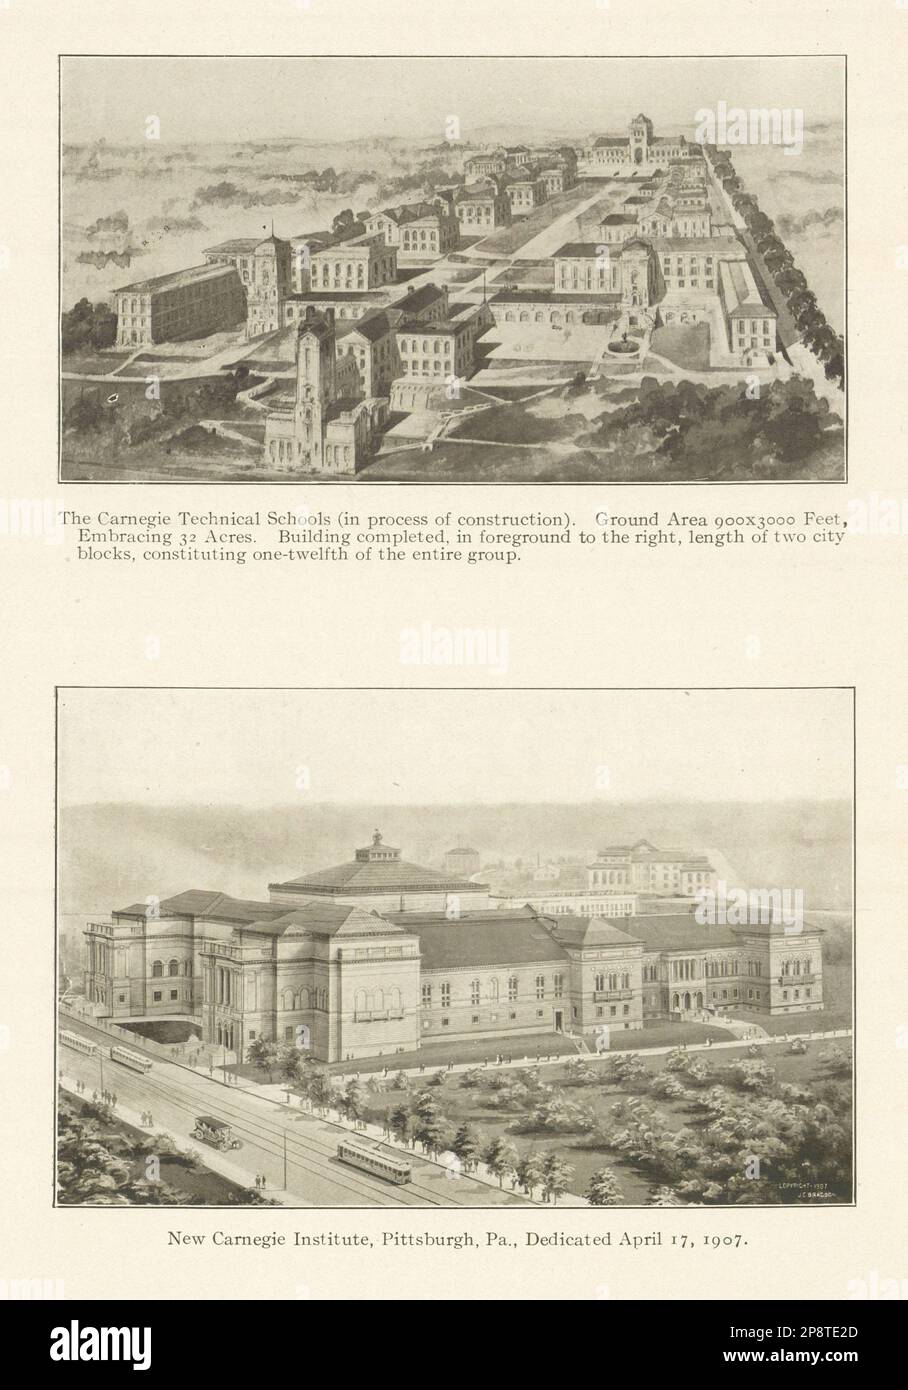 Carnegie Technical Schools (under construction) & Institute Pittsburgh 1907 Stock Photo